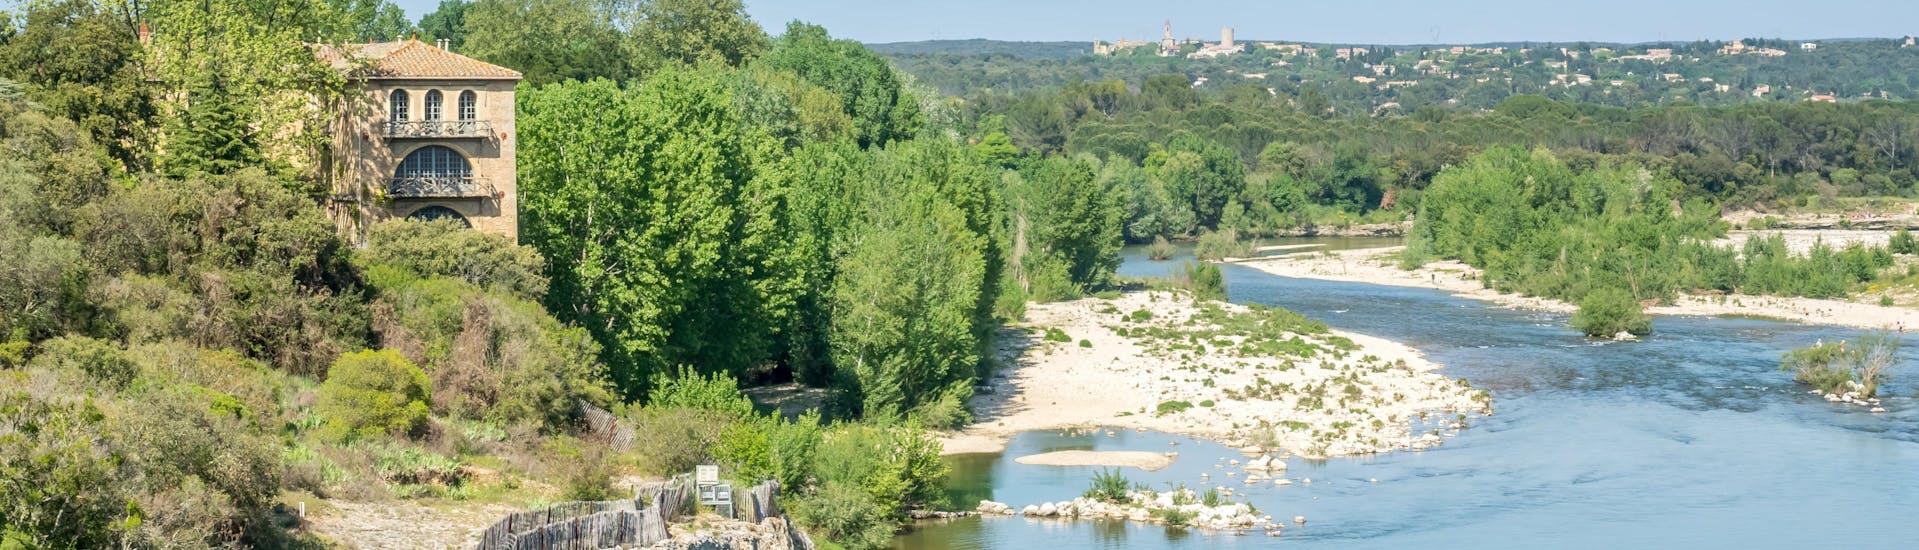 View of the Gardon river passing through Collias, one of the canoeing hotspots in France, allowing you to paddle under the Pont du Gard.